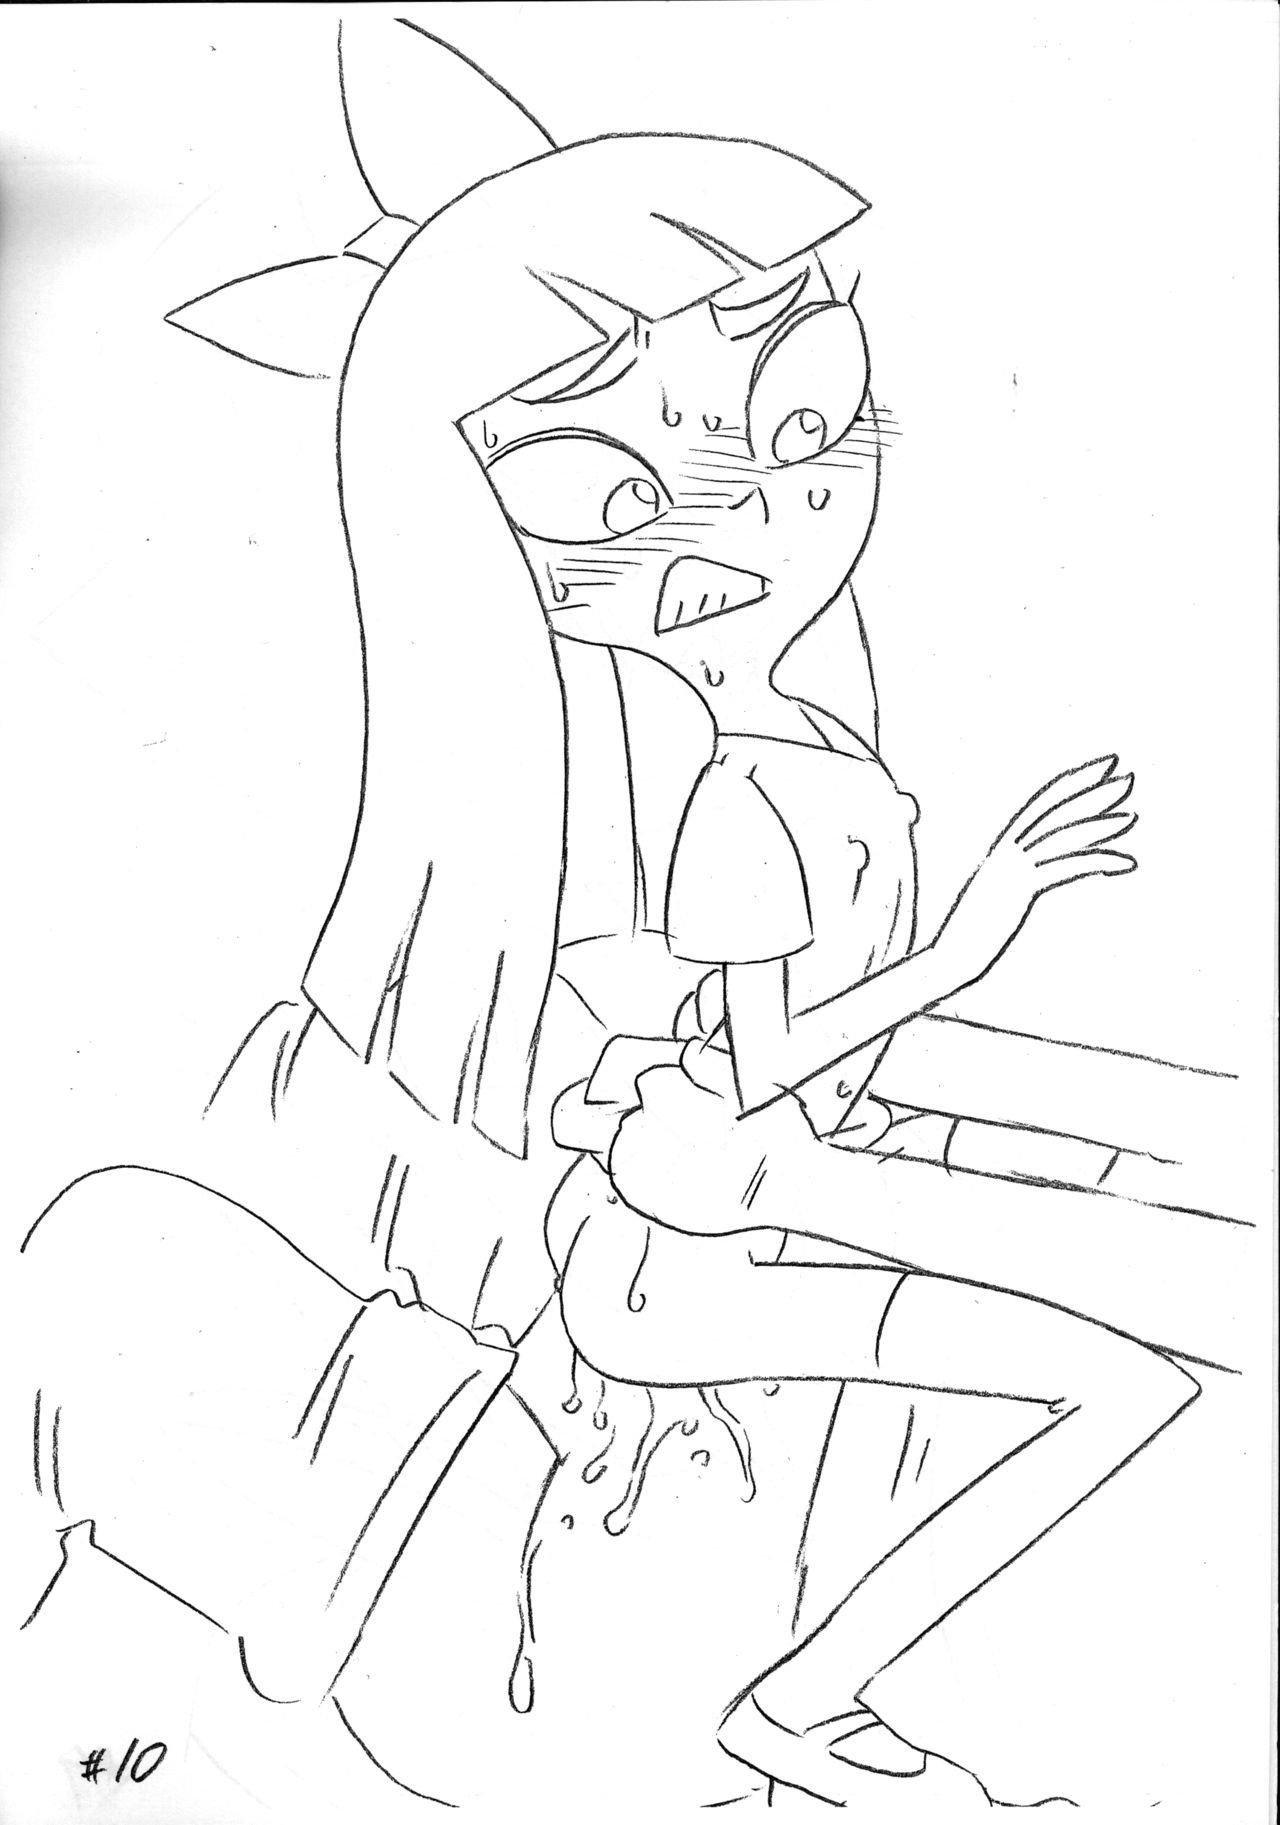 Hardcore Fuck Psychosomatic Counterfeit Ex: Stacy in Early Age - Phineas and ferb Big - Page 9